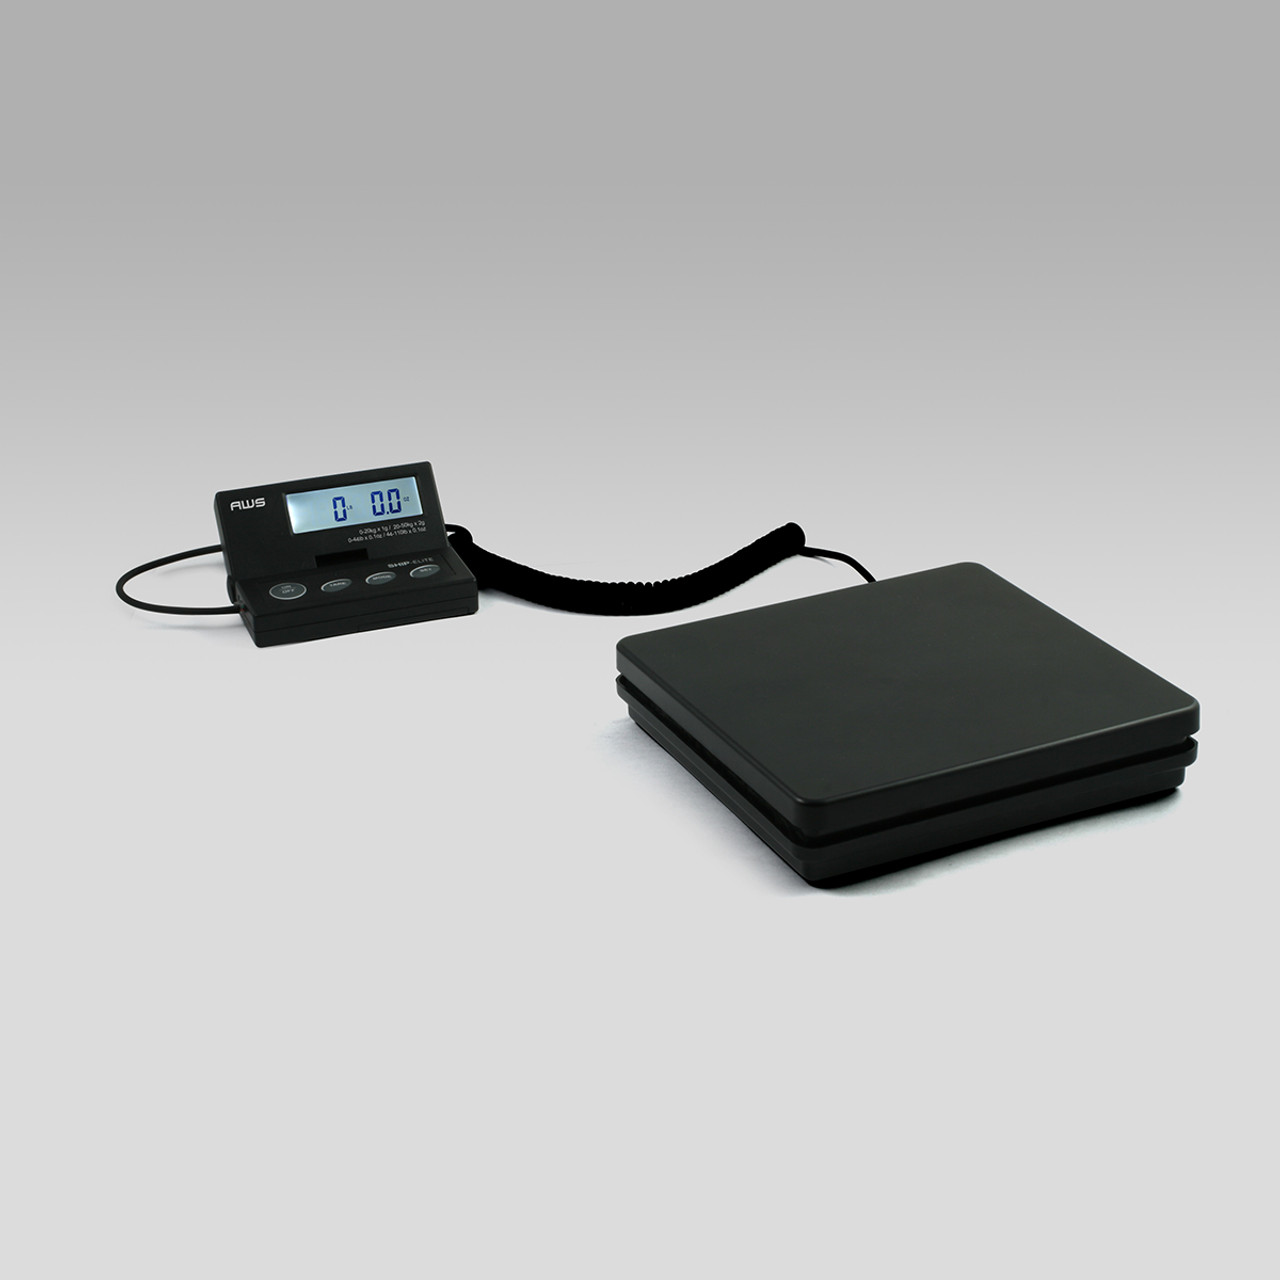 DIGITAL SHIPPING SCALE, 110 LBS X 0.1 OZ (SE-50) American Weigh Scales